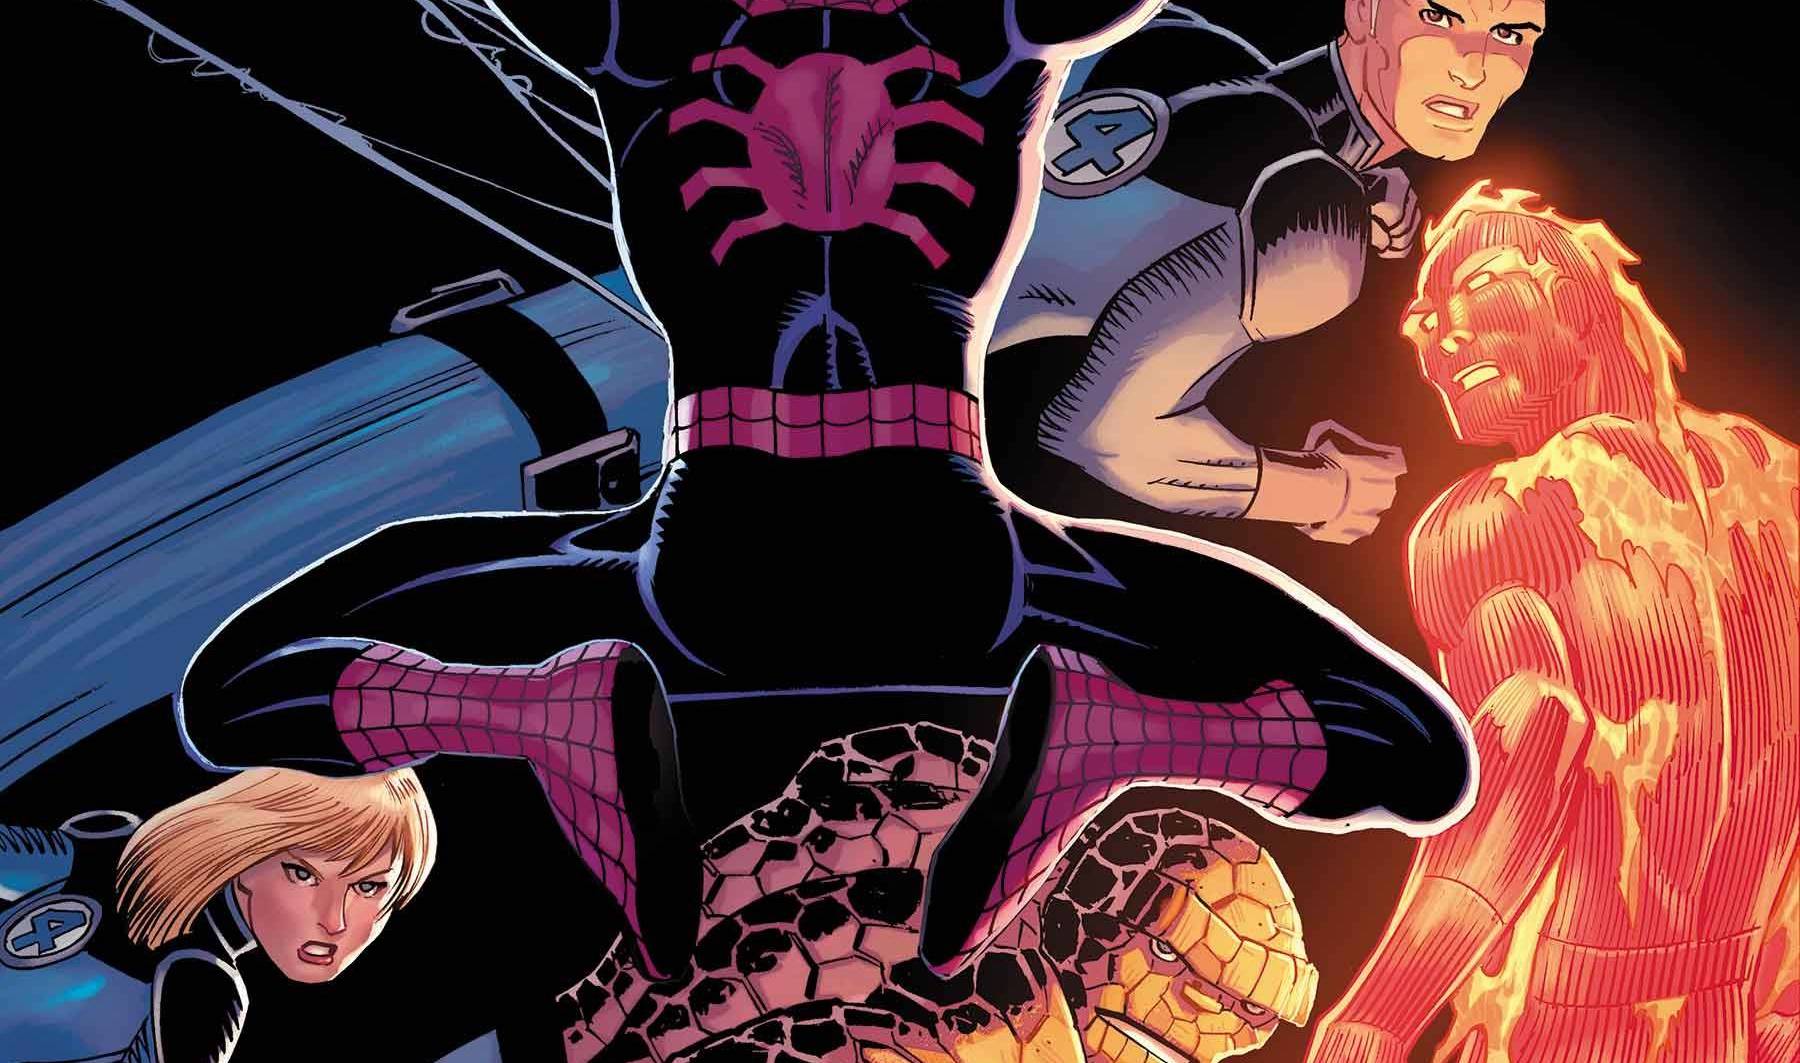 'Amazing Spider-Man' #23 has Peter Parker running out of time to save Mary Jane